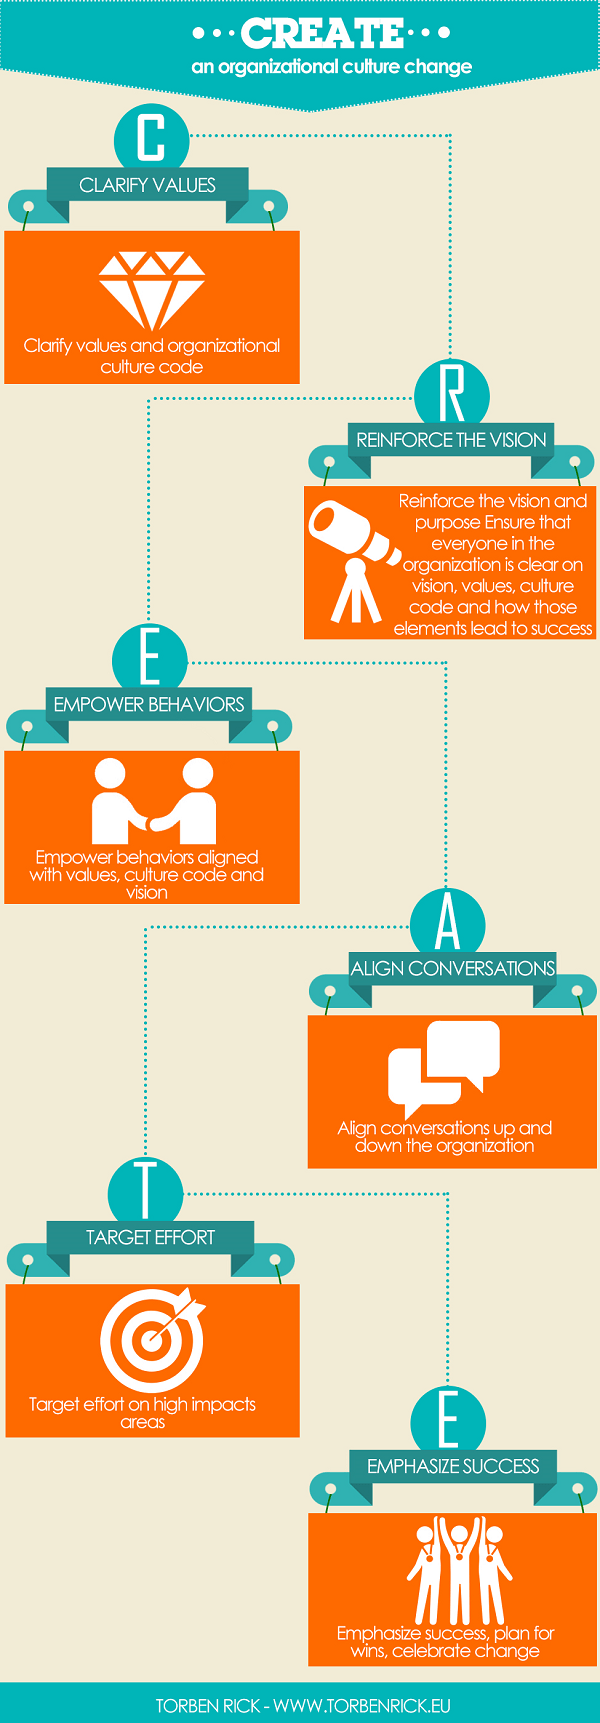 Infographic - CREATE a culture change